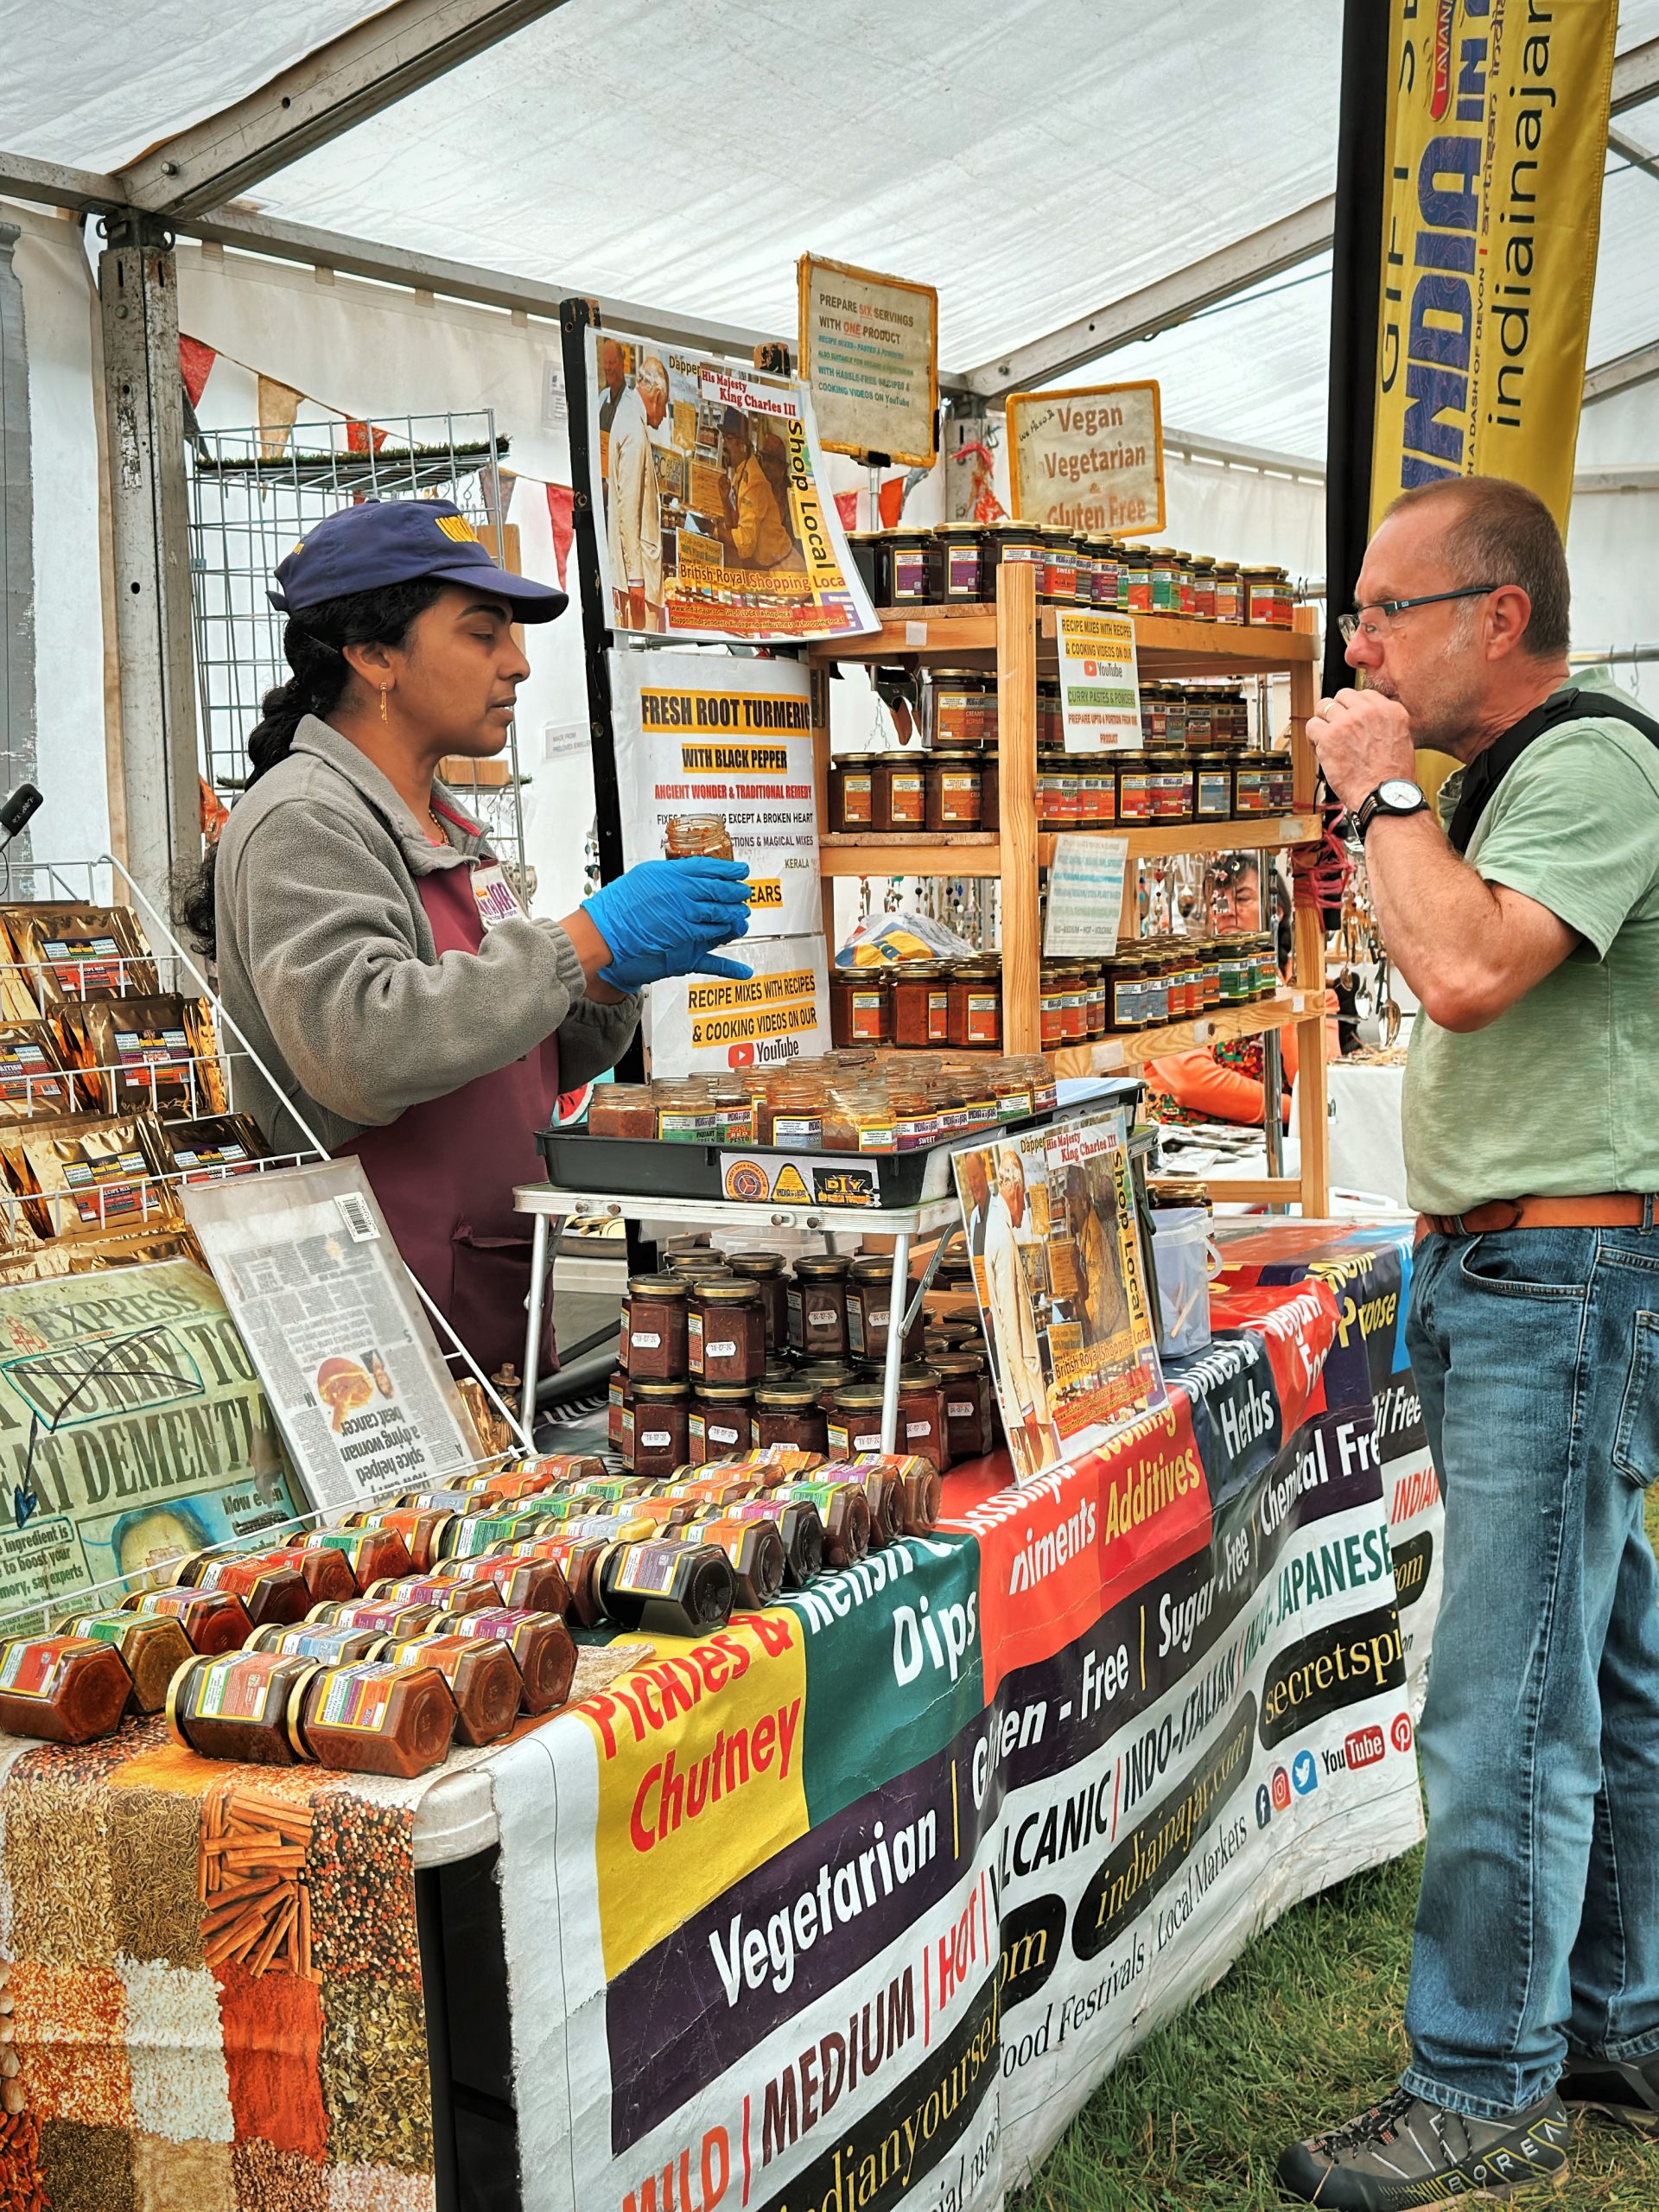 a trader in the Artisan Marquee discussing their produce with a customer